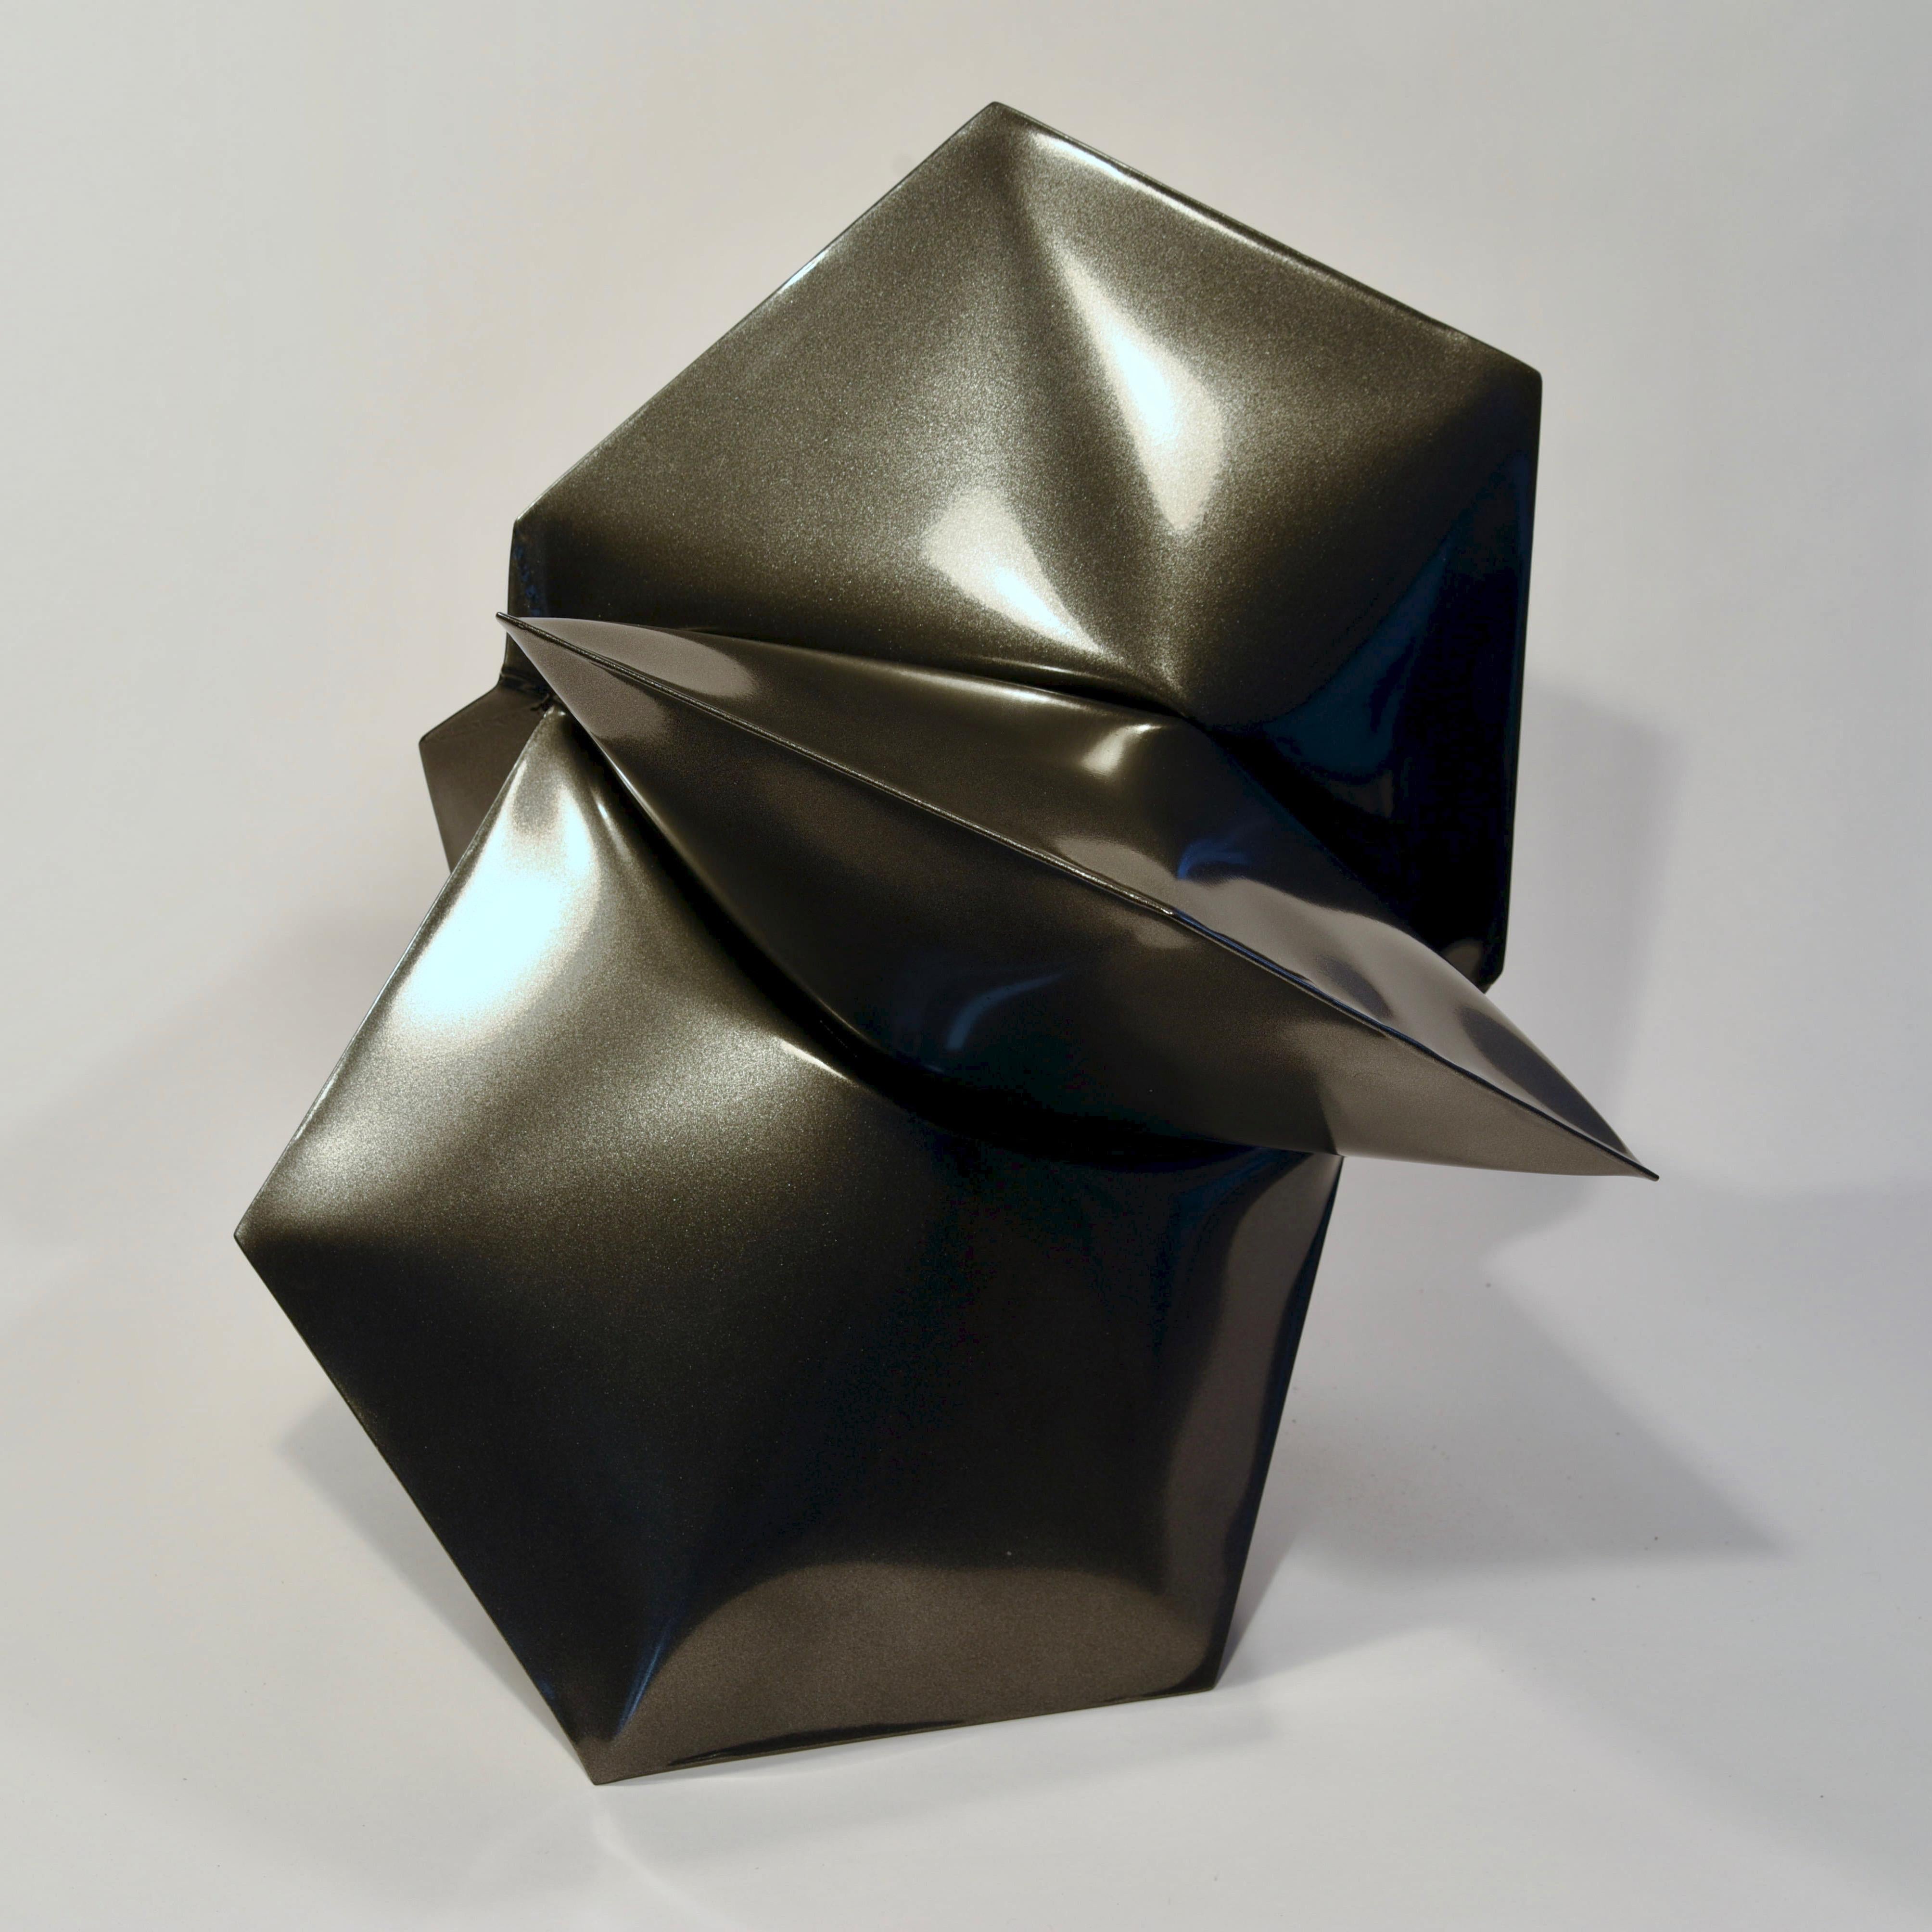 forged mild steel and and acrylic urethane
Jeremy Thomas is a maker. His work explores objecthood; how a sculpture interacts with its surroundings, how the viewer interacts with a sculpture, and how works have changed and evolved. Most recently his